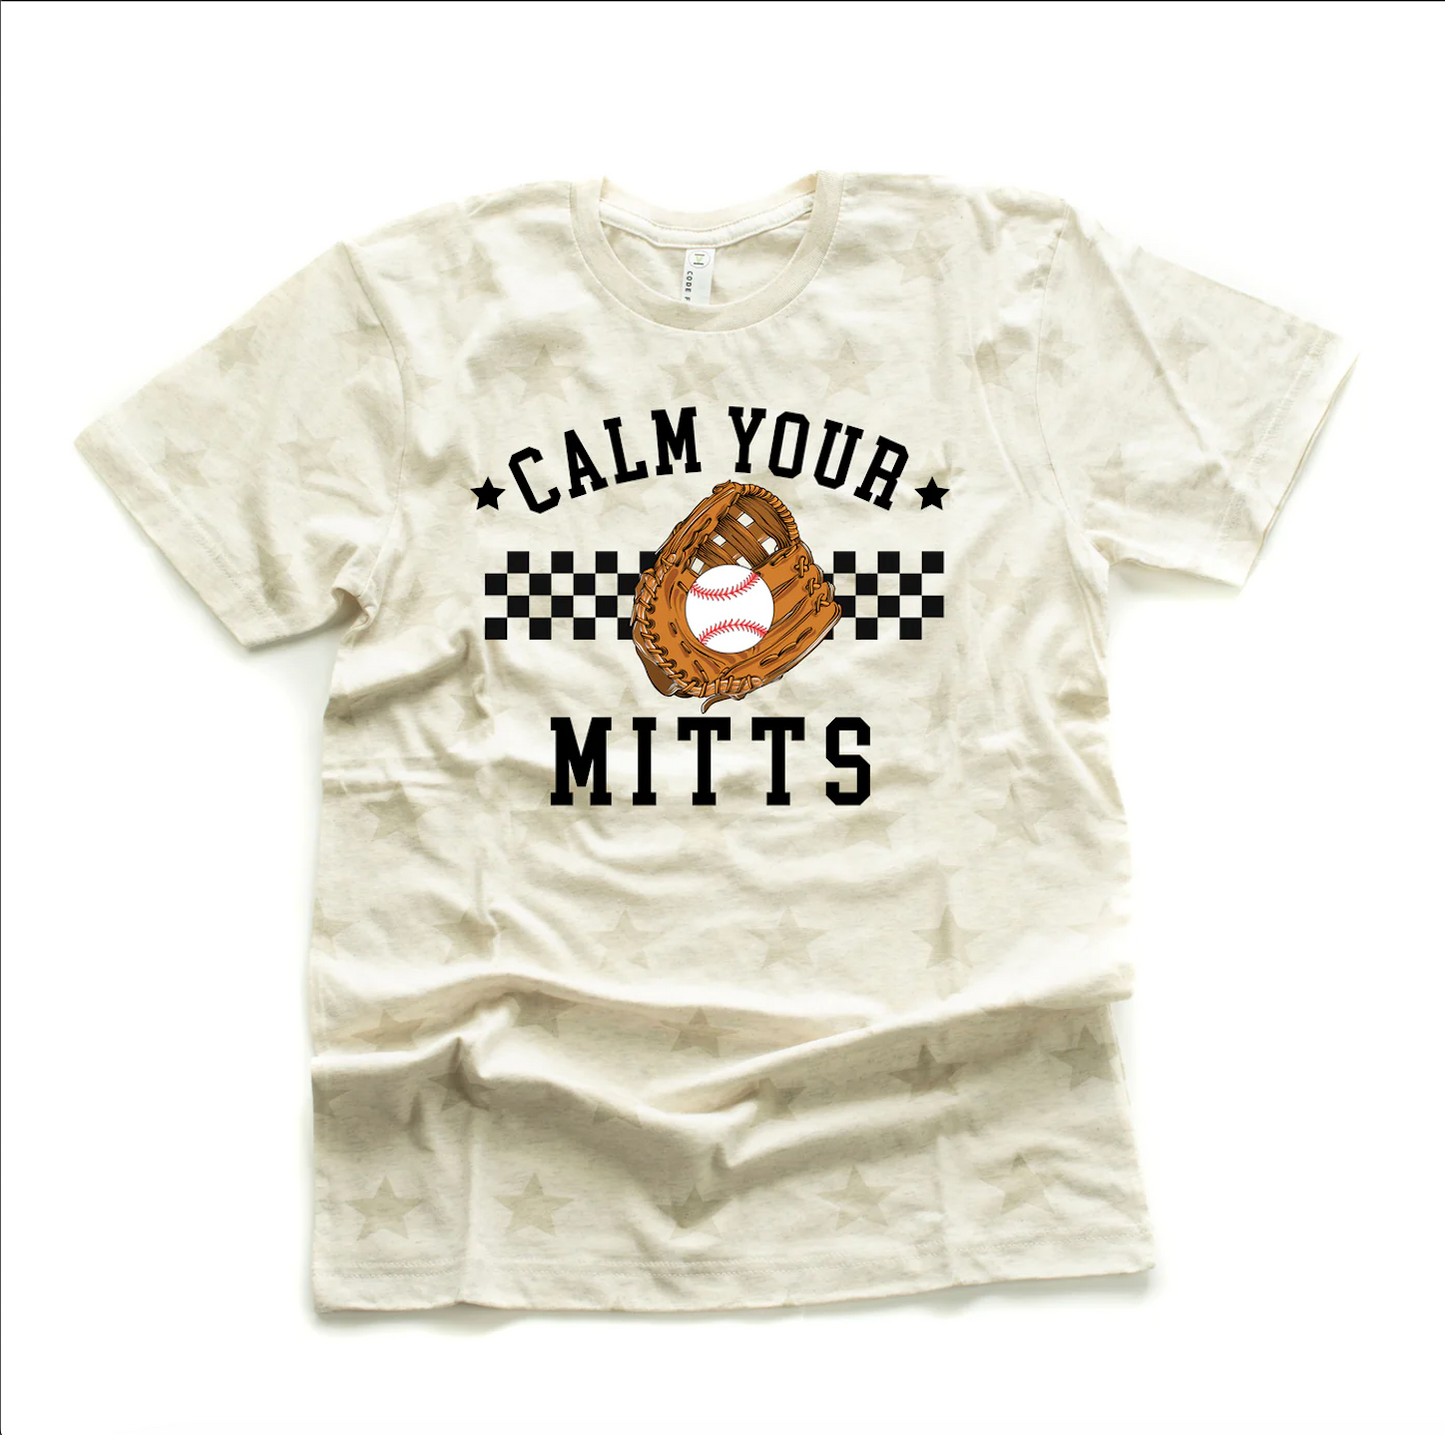 Star Printed Tee- Calm Your Mitts Baseball Shirt - Toddler, Youth, Adult Sized Tees